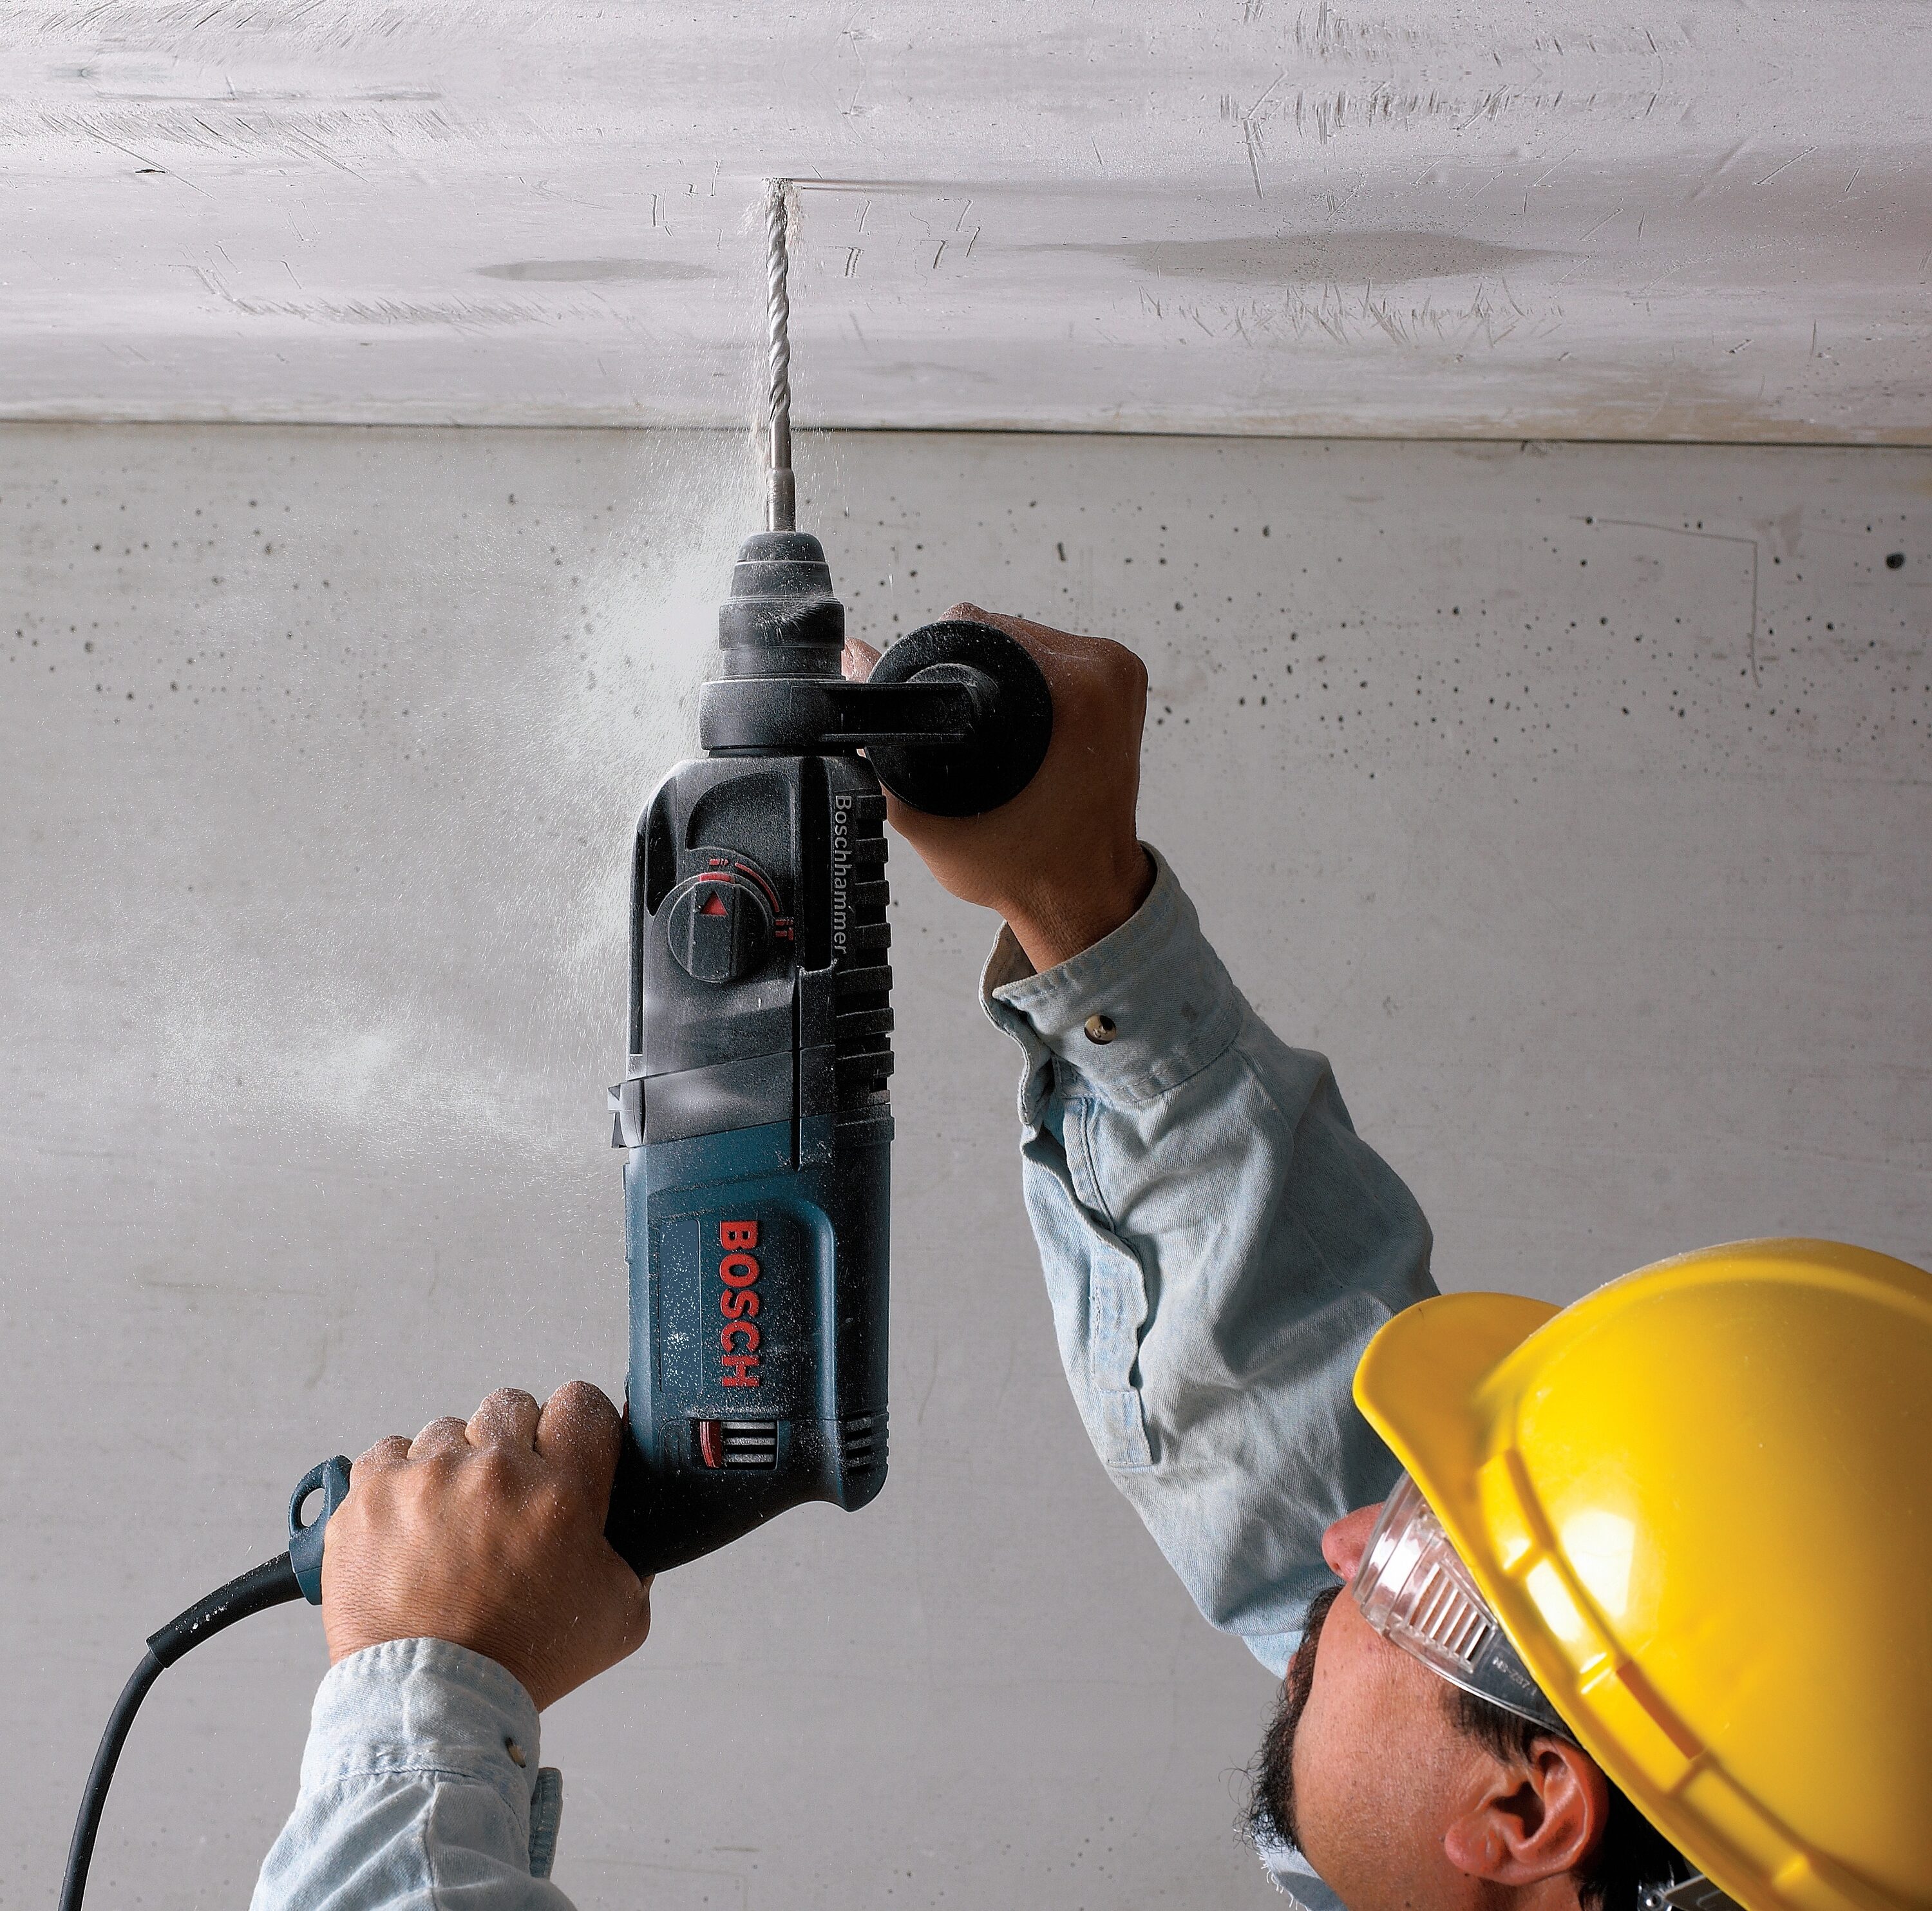 Bosch 6.1-Amp Sds-plus Variable Speed Corded Rotary Hammer Drill